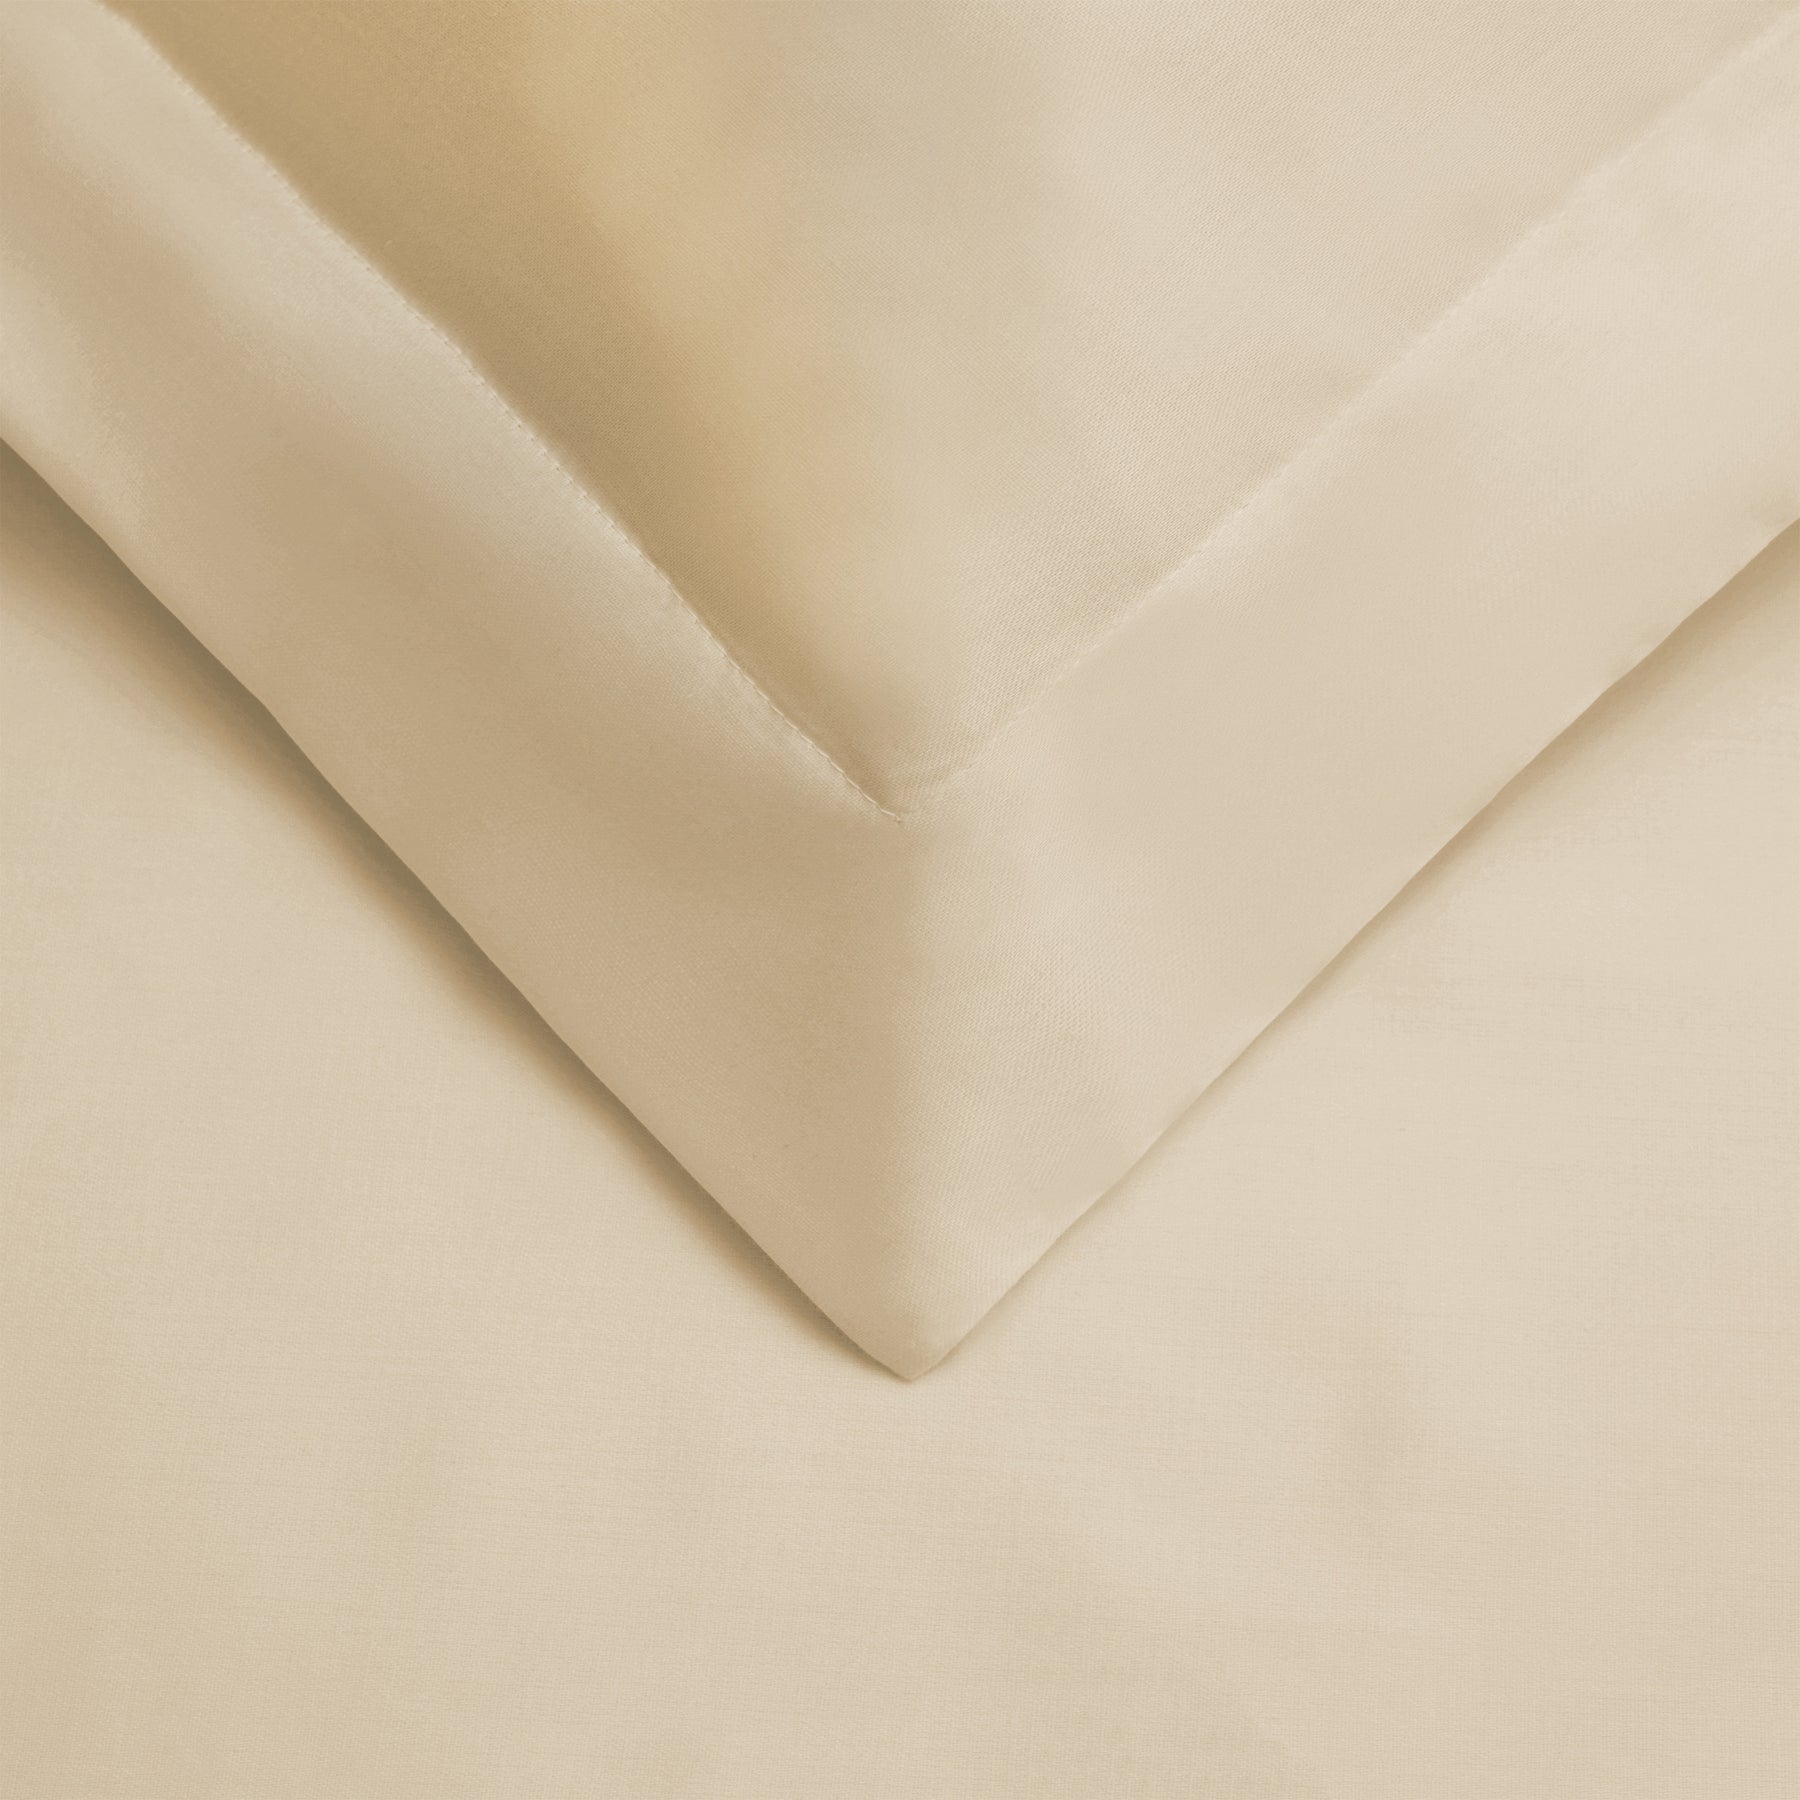 Superior Egyptian Cotton 300 Thread Count Solid Duvet Cover Set - Ivory